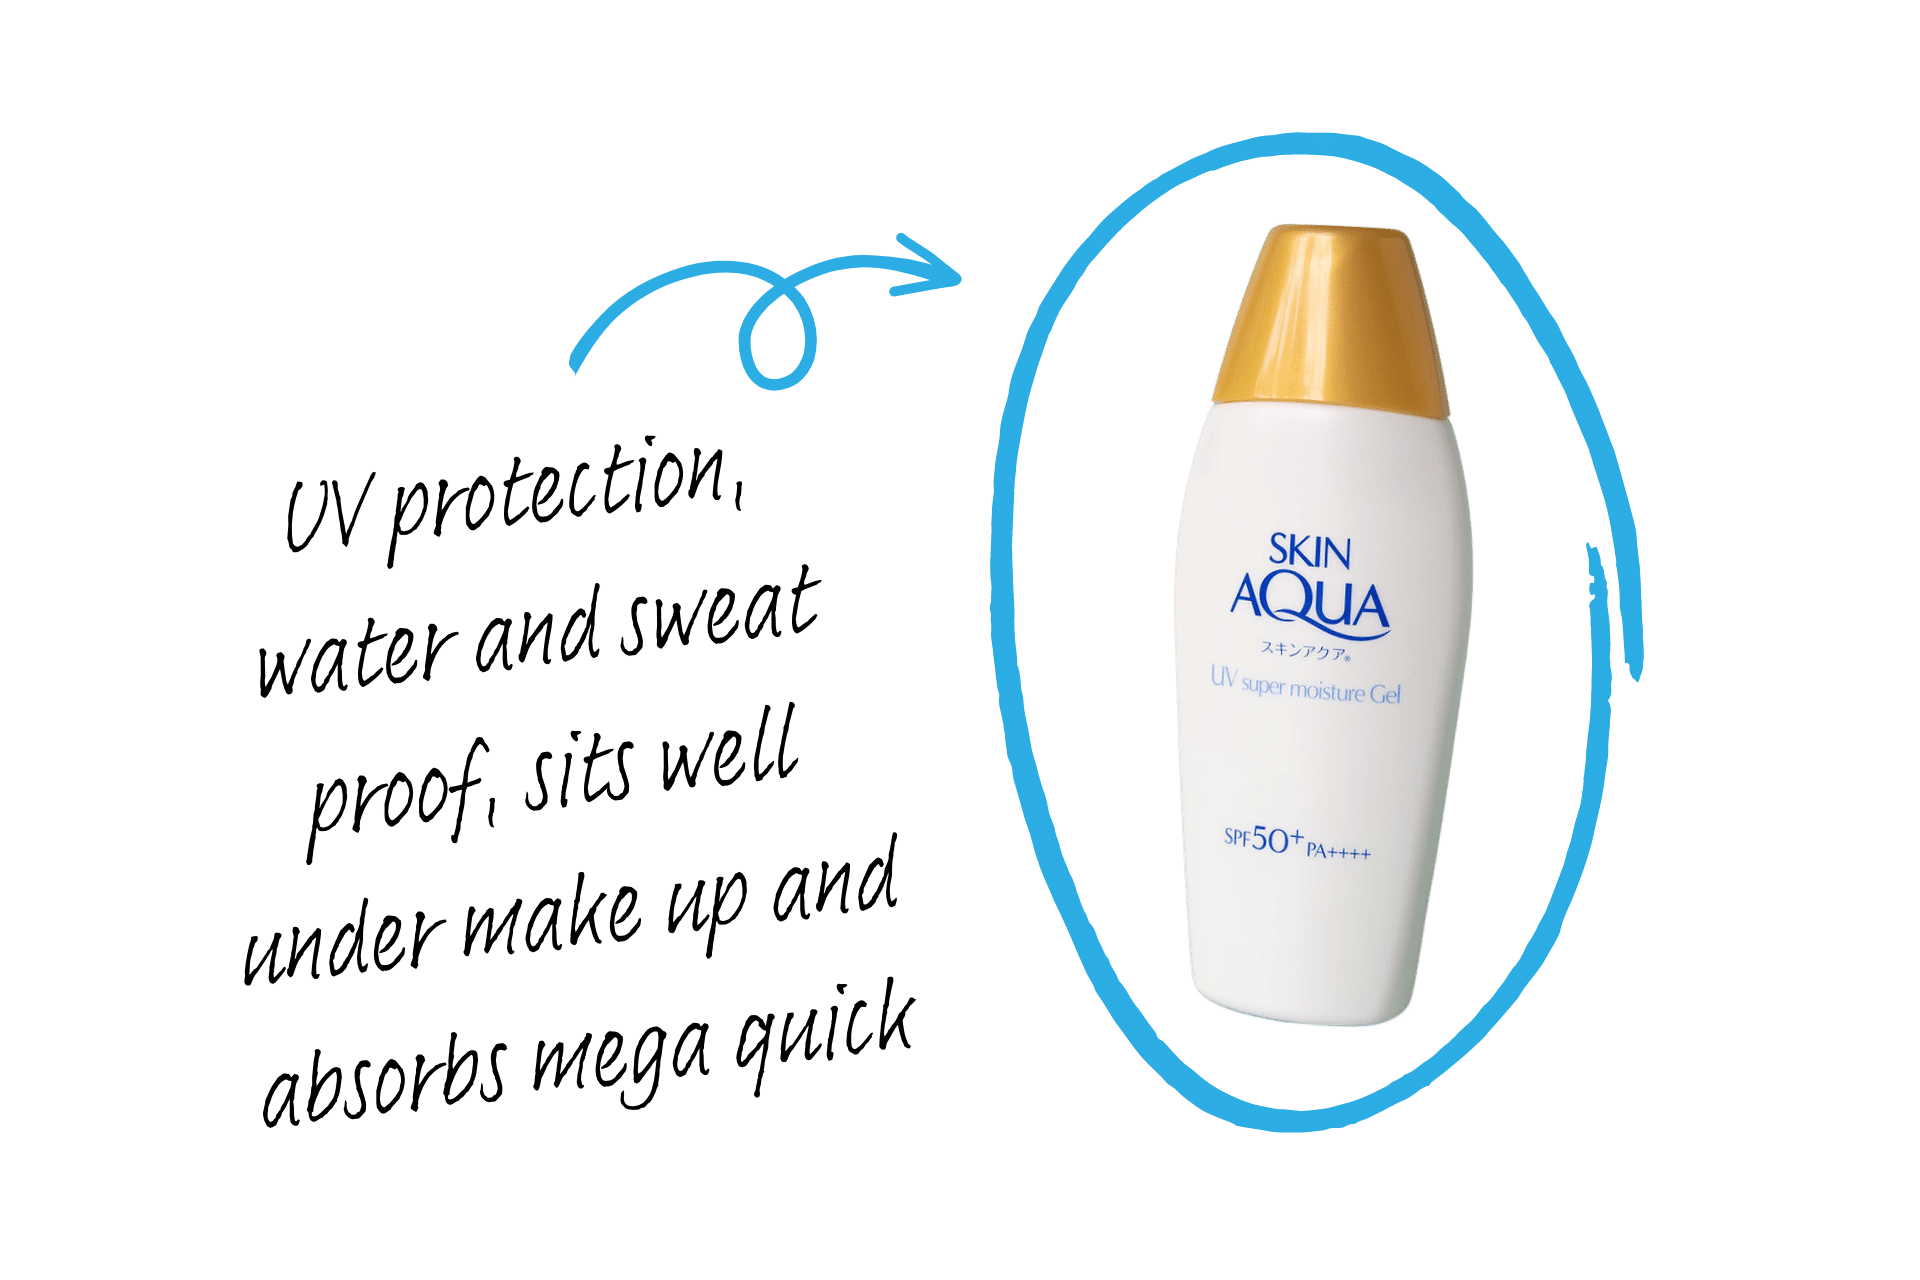 Skin Aqua UV Super Moisture Gel has UV protection and is sweat and water resistant, making it one of the best sunscreens right now.